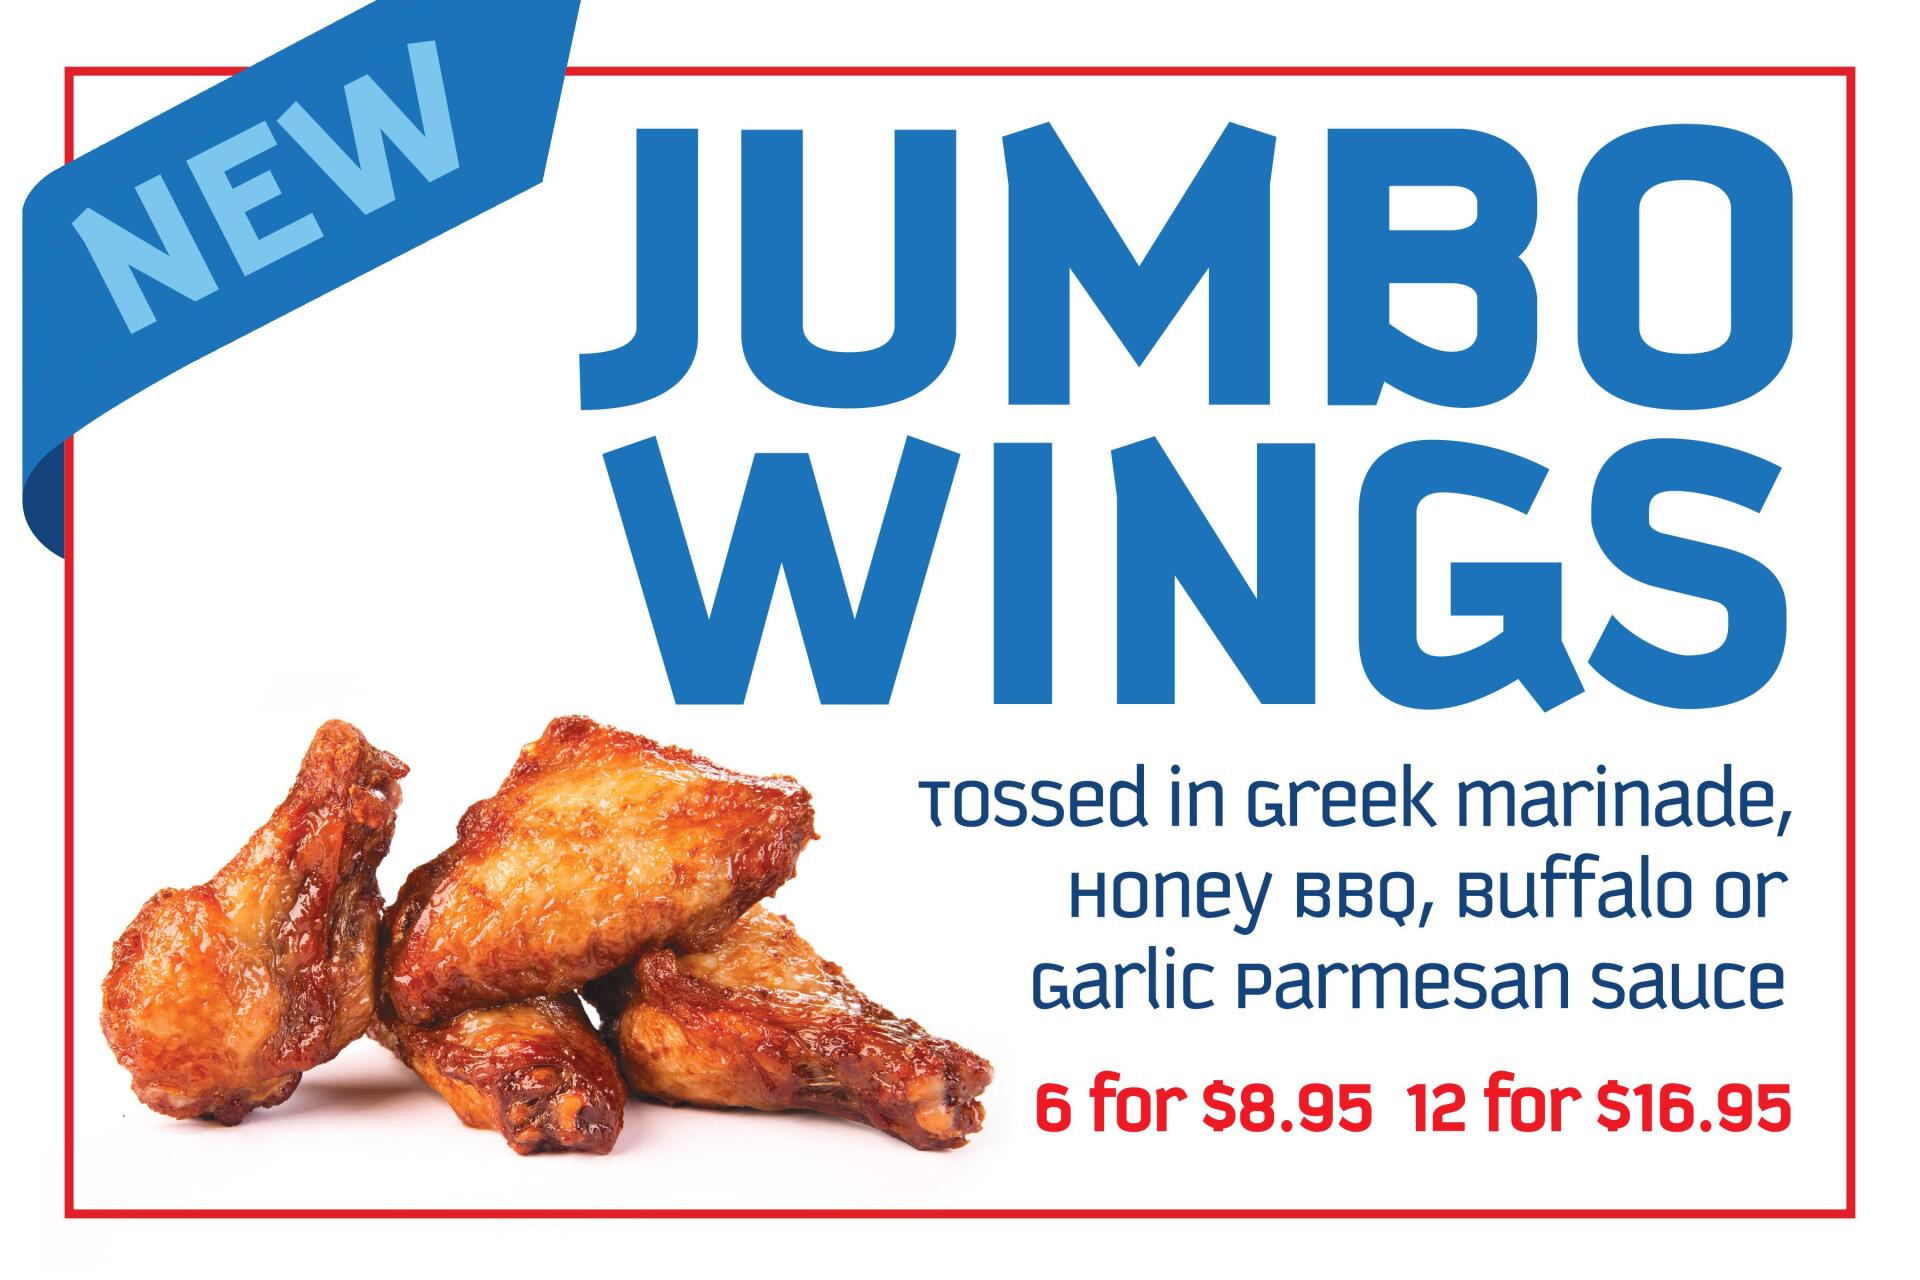 jumbo wings sauce options and prices